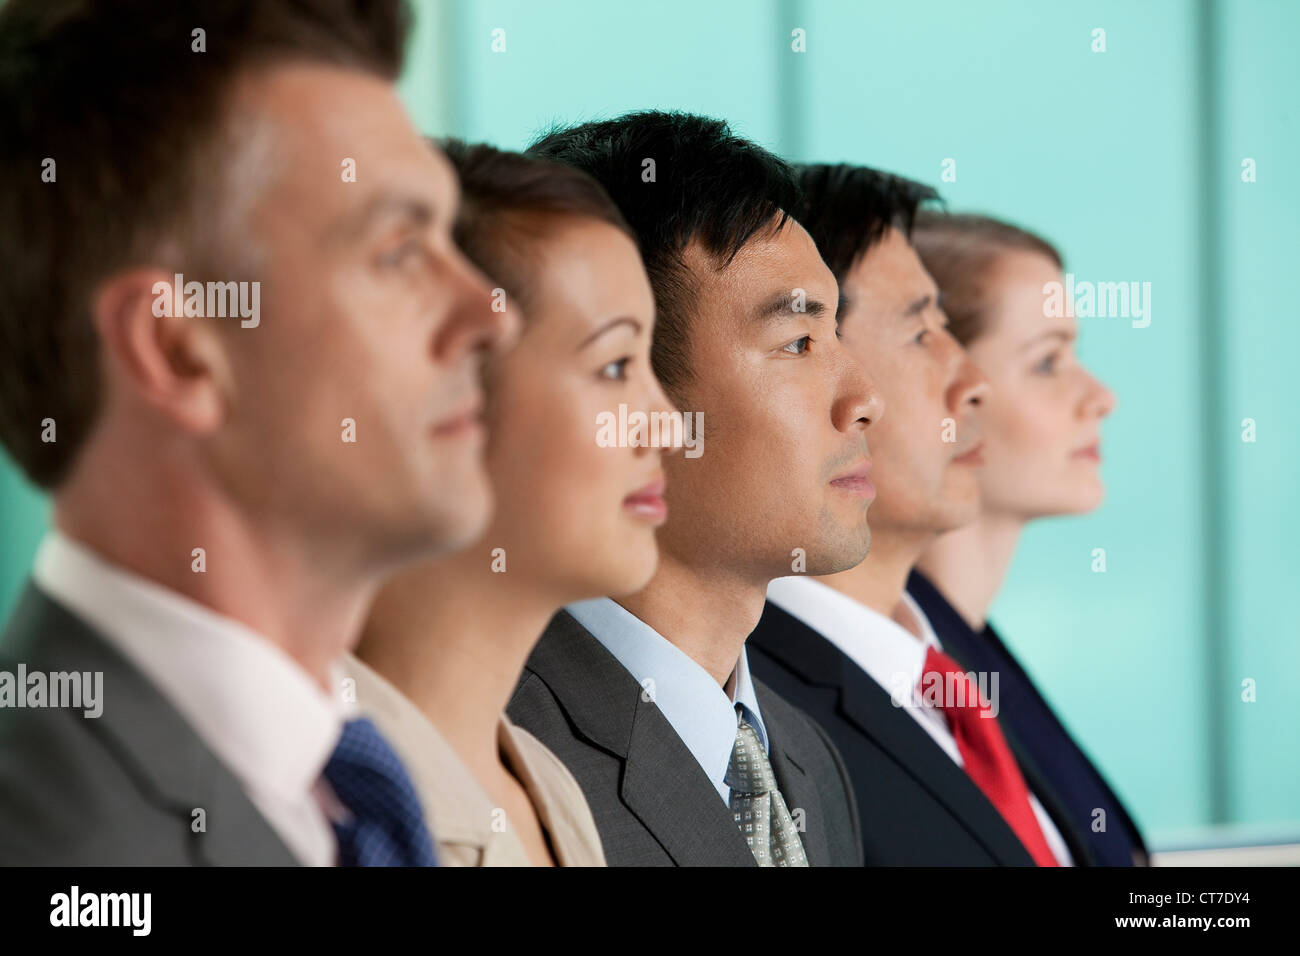 Multi racial businesspeople in a line, portrait Stock Photo